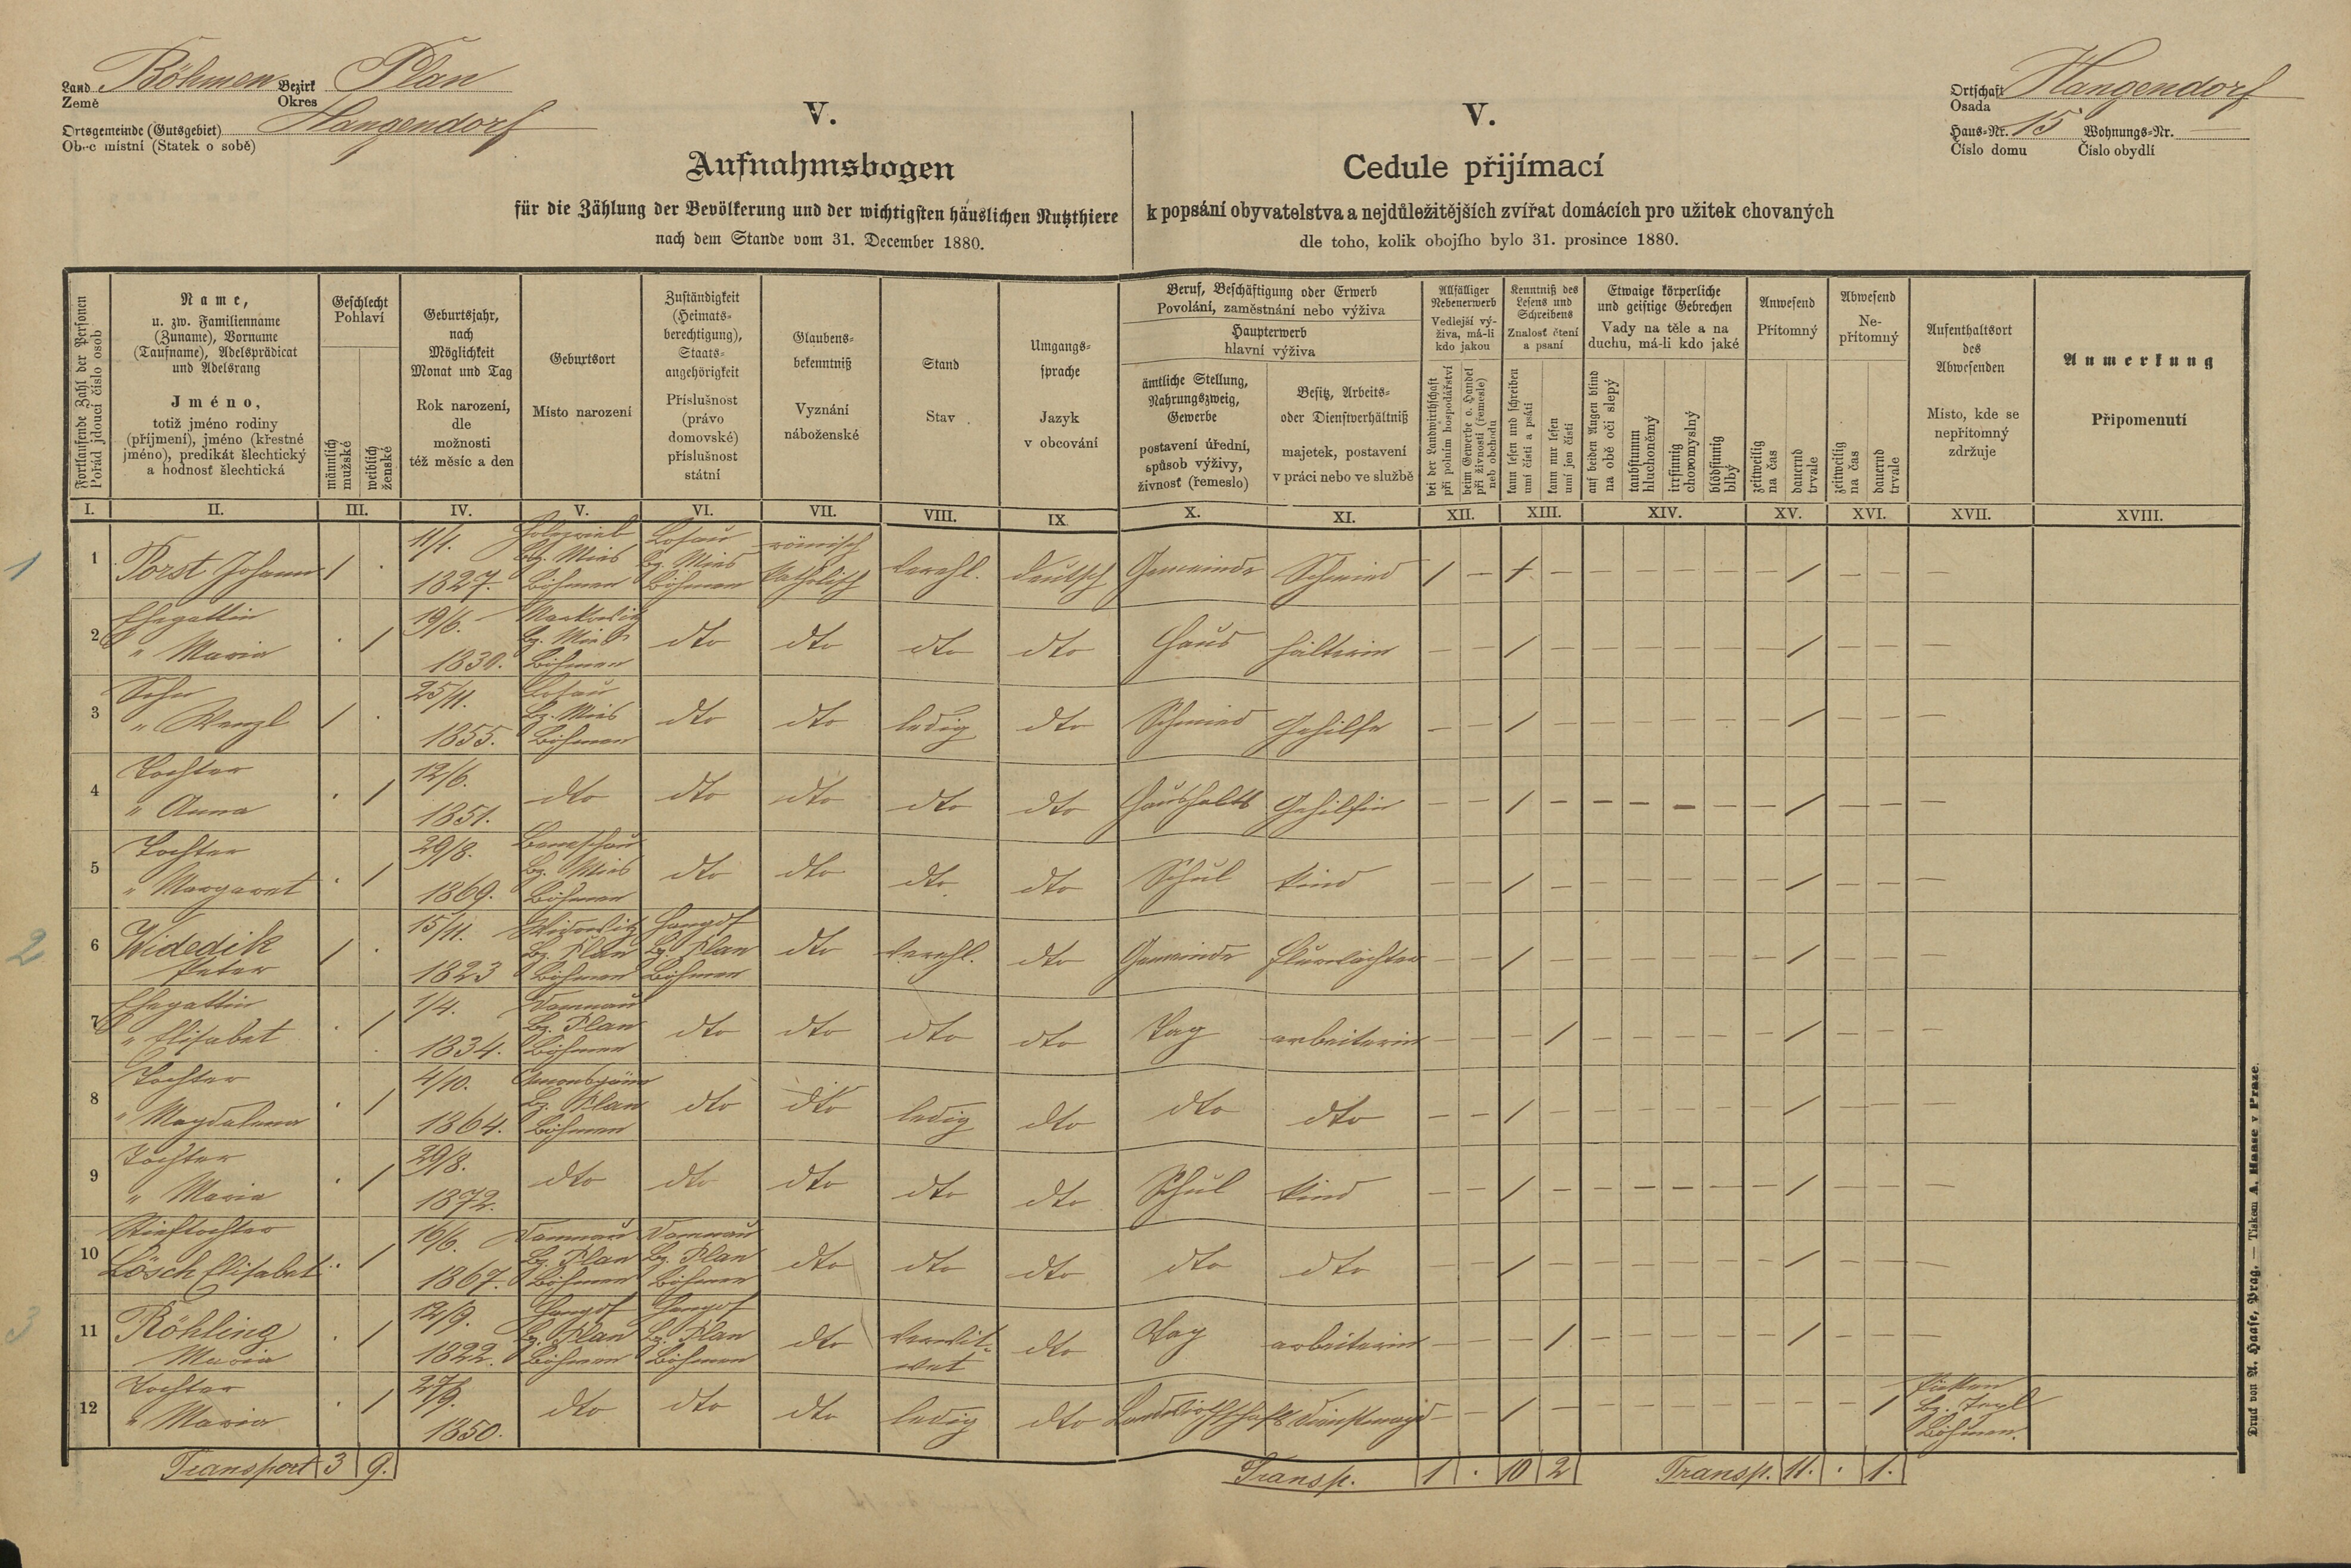 1. soap-tc_00191_census-1880-svahy-cp015_0010